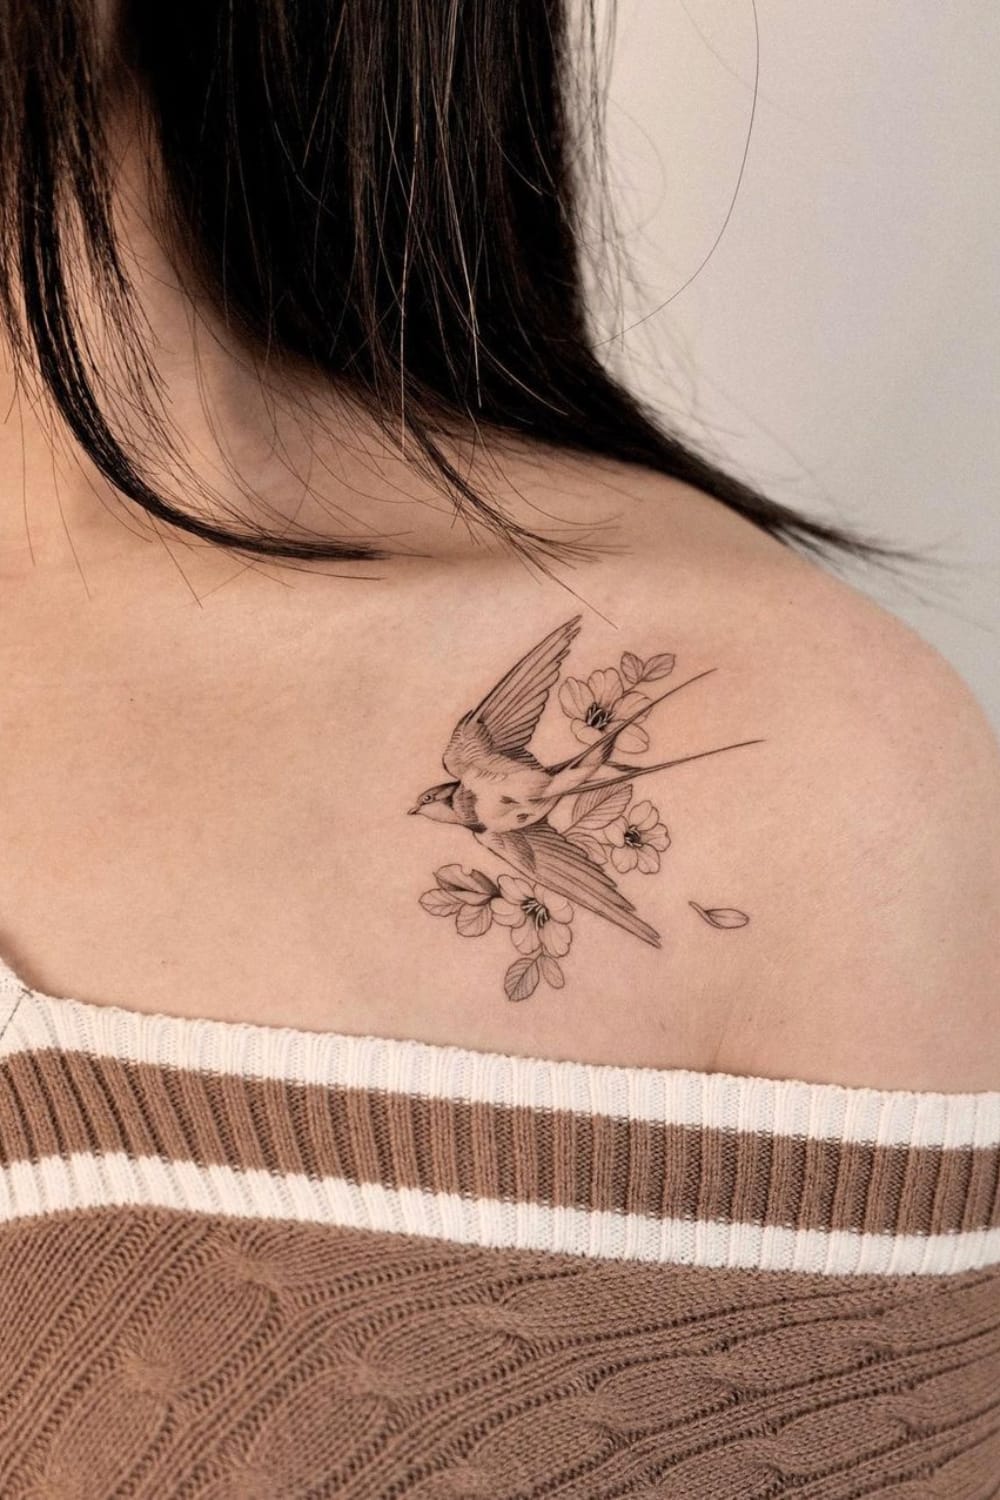 Swallow Tattoo With Flowers